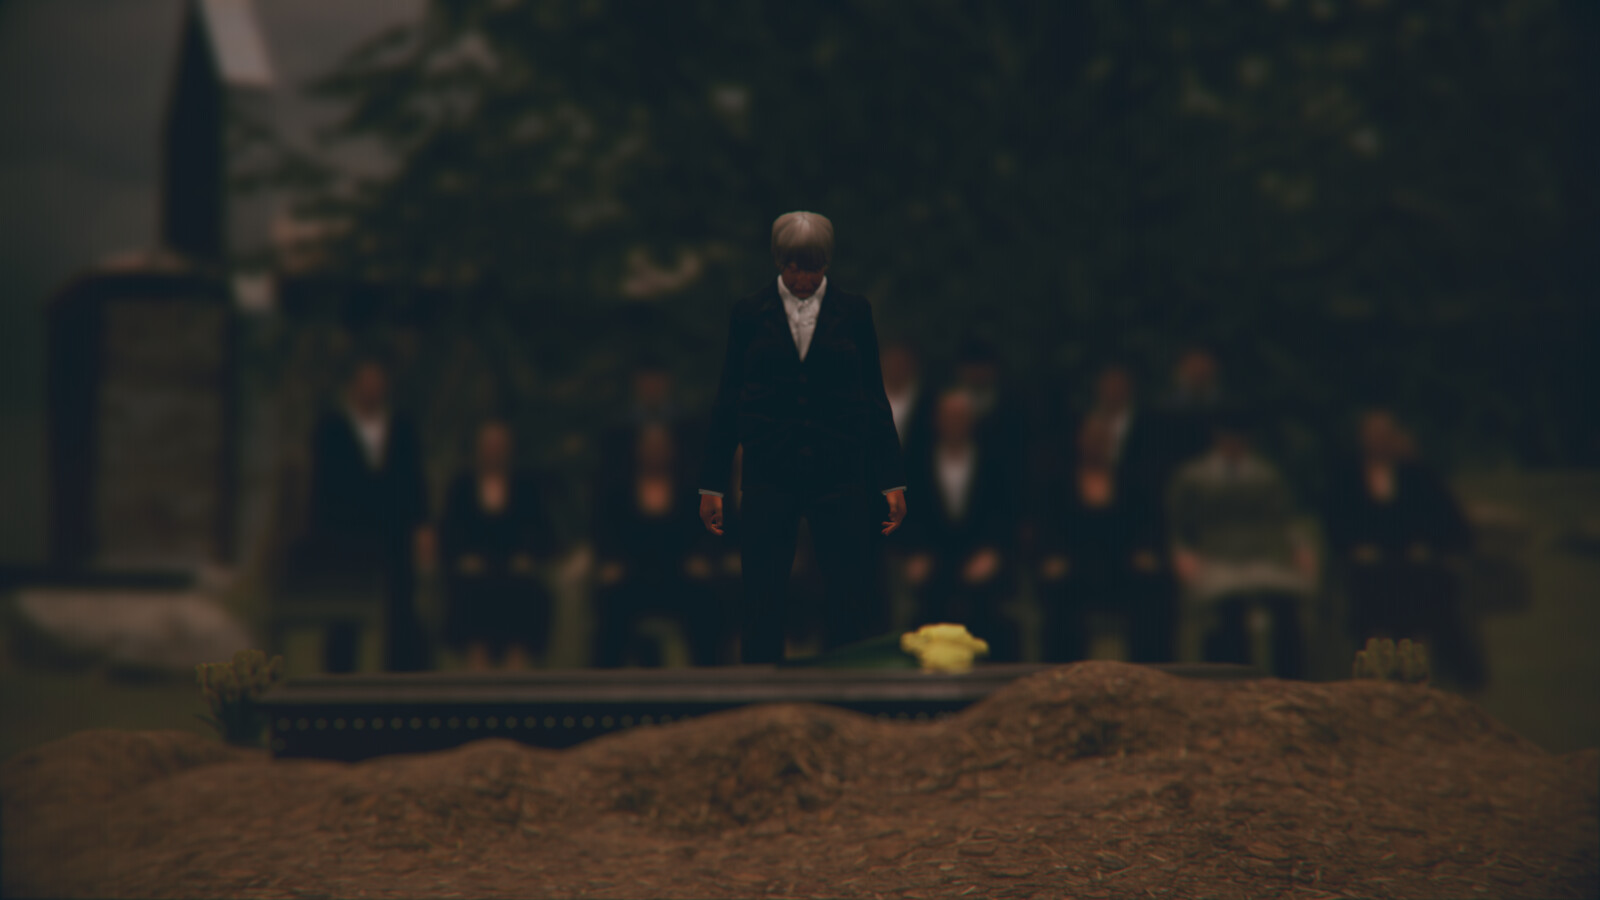 One of two funeral scenes from my new short animation project.